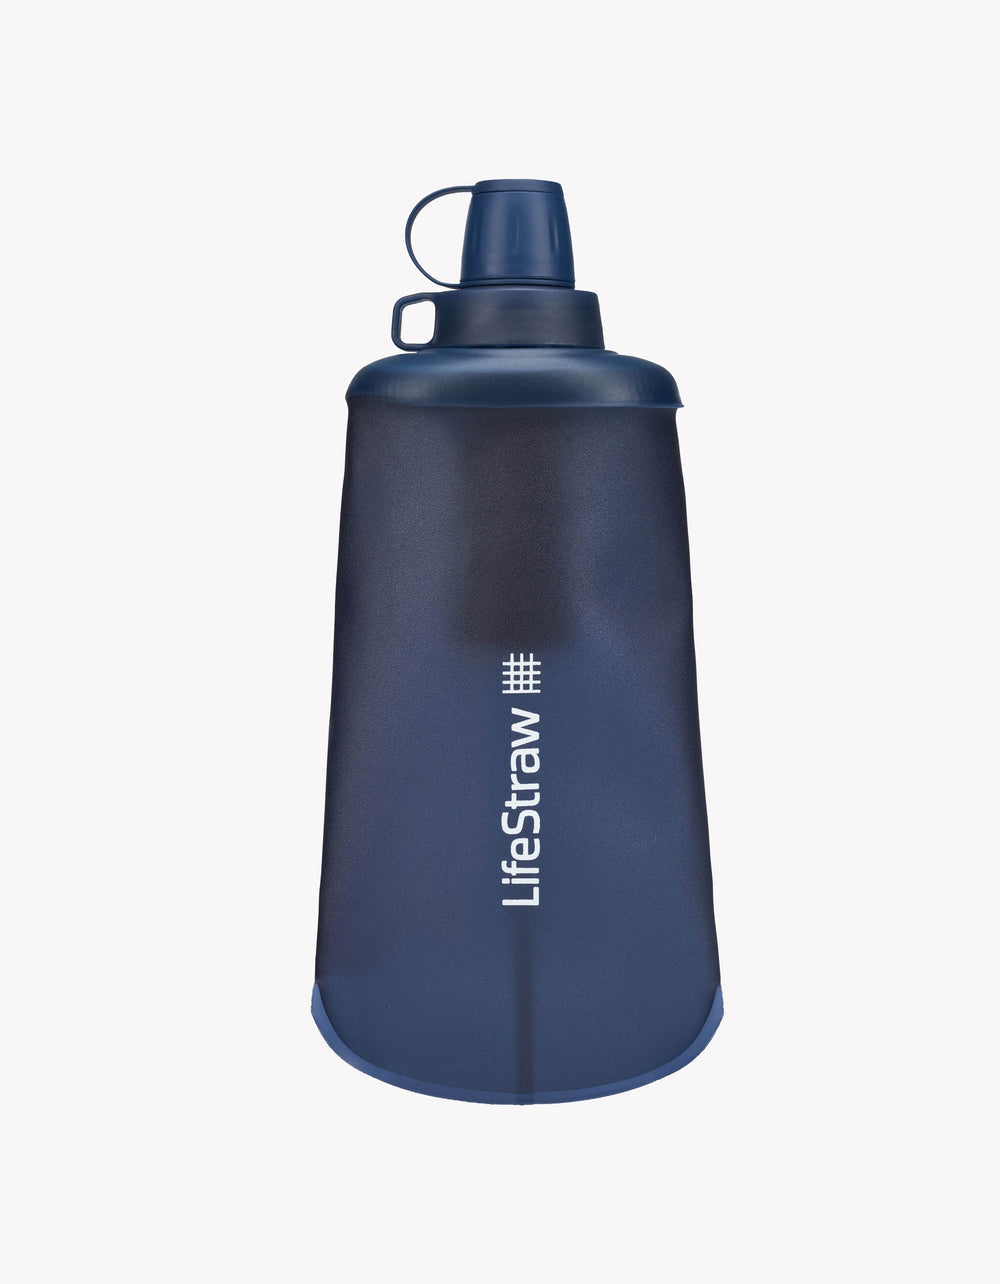 LifeStraw - 650ml Collapsible Squeeze Bottle - Mountain Blue